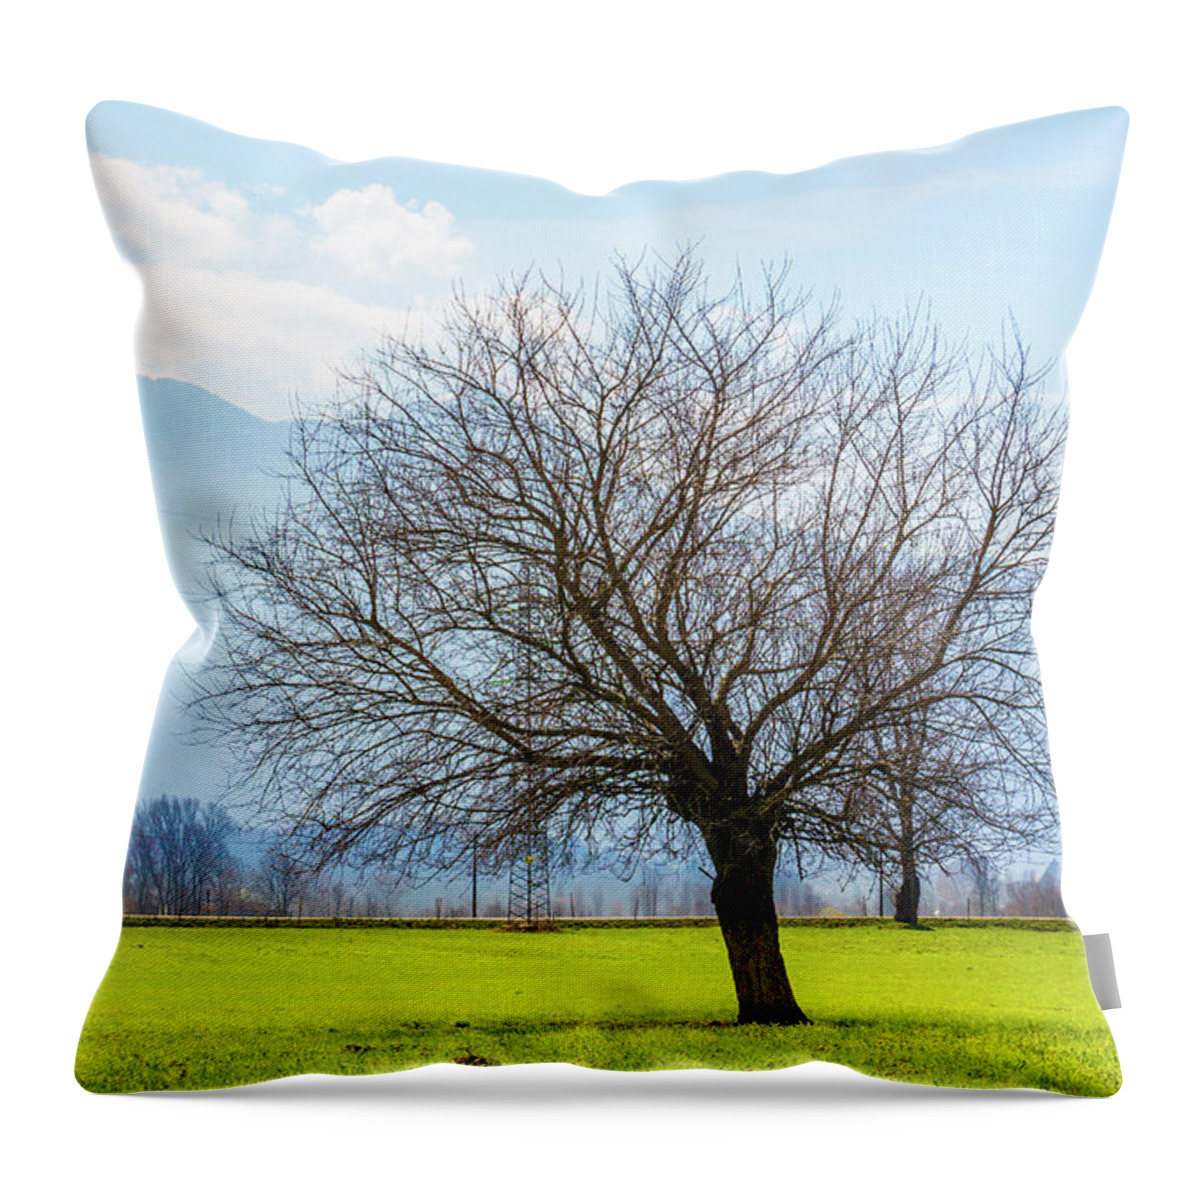 Dubino Throw Pillow featuring the photograph Old Tree by Pavel Melnikov